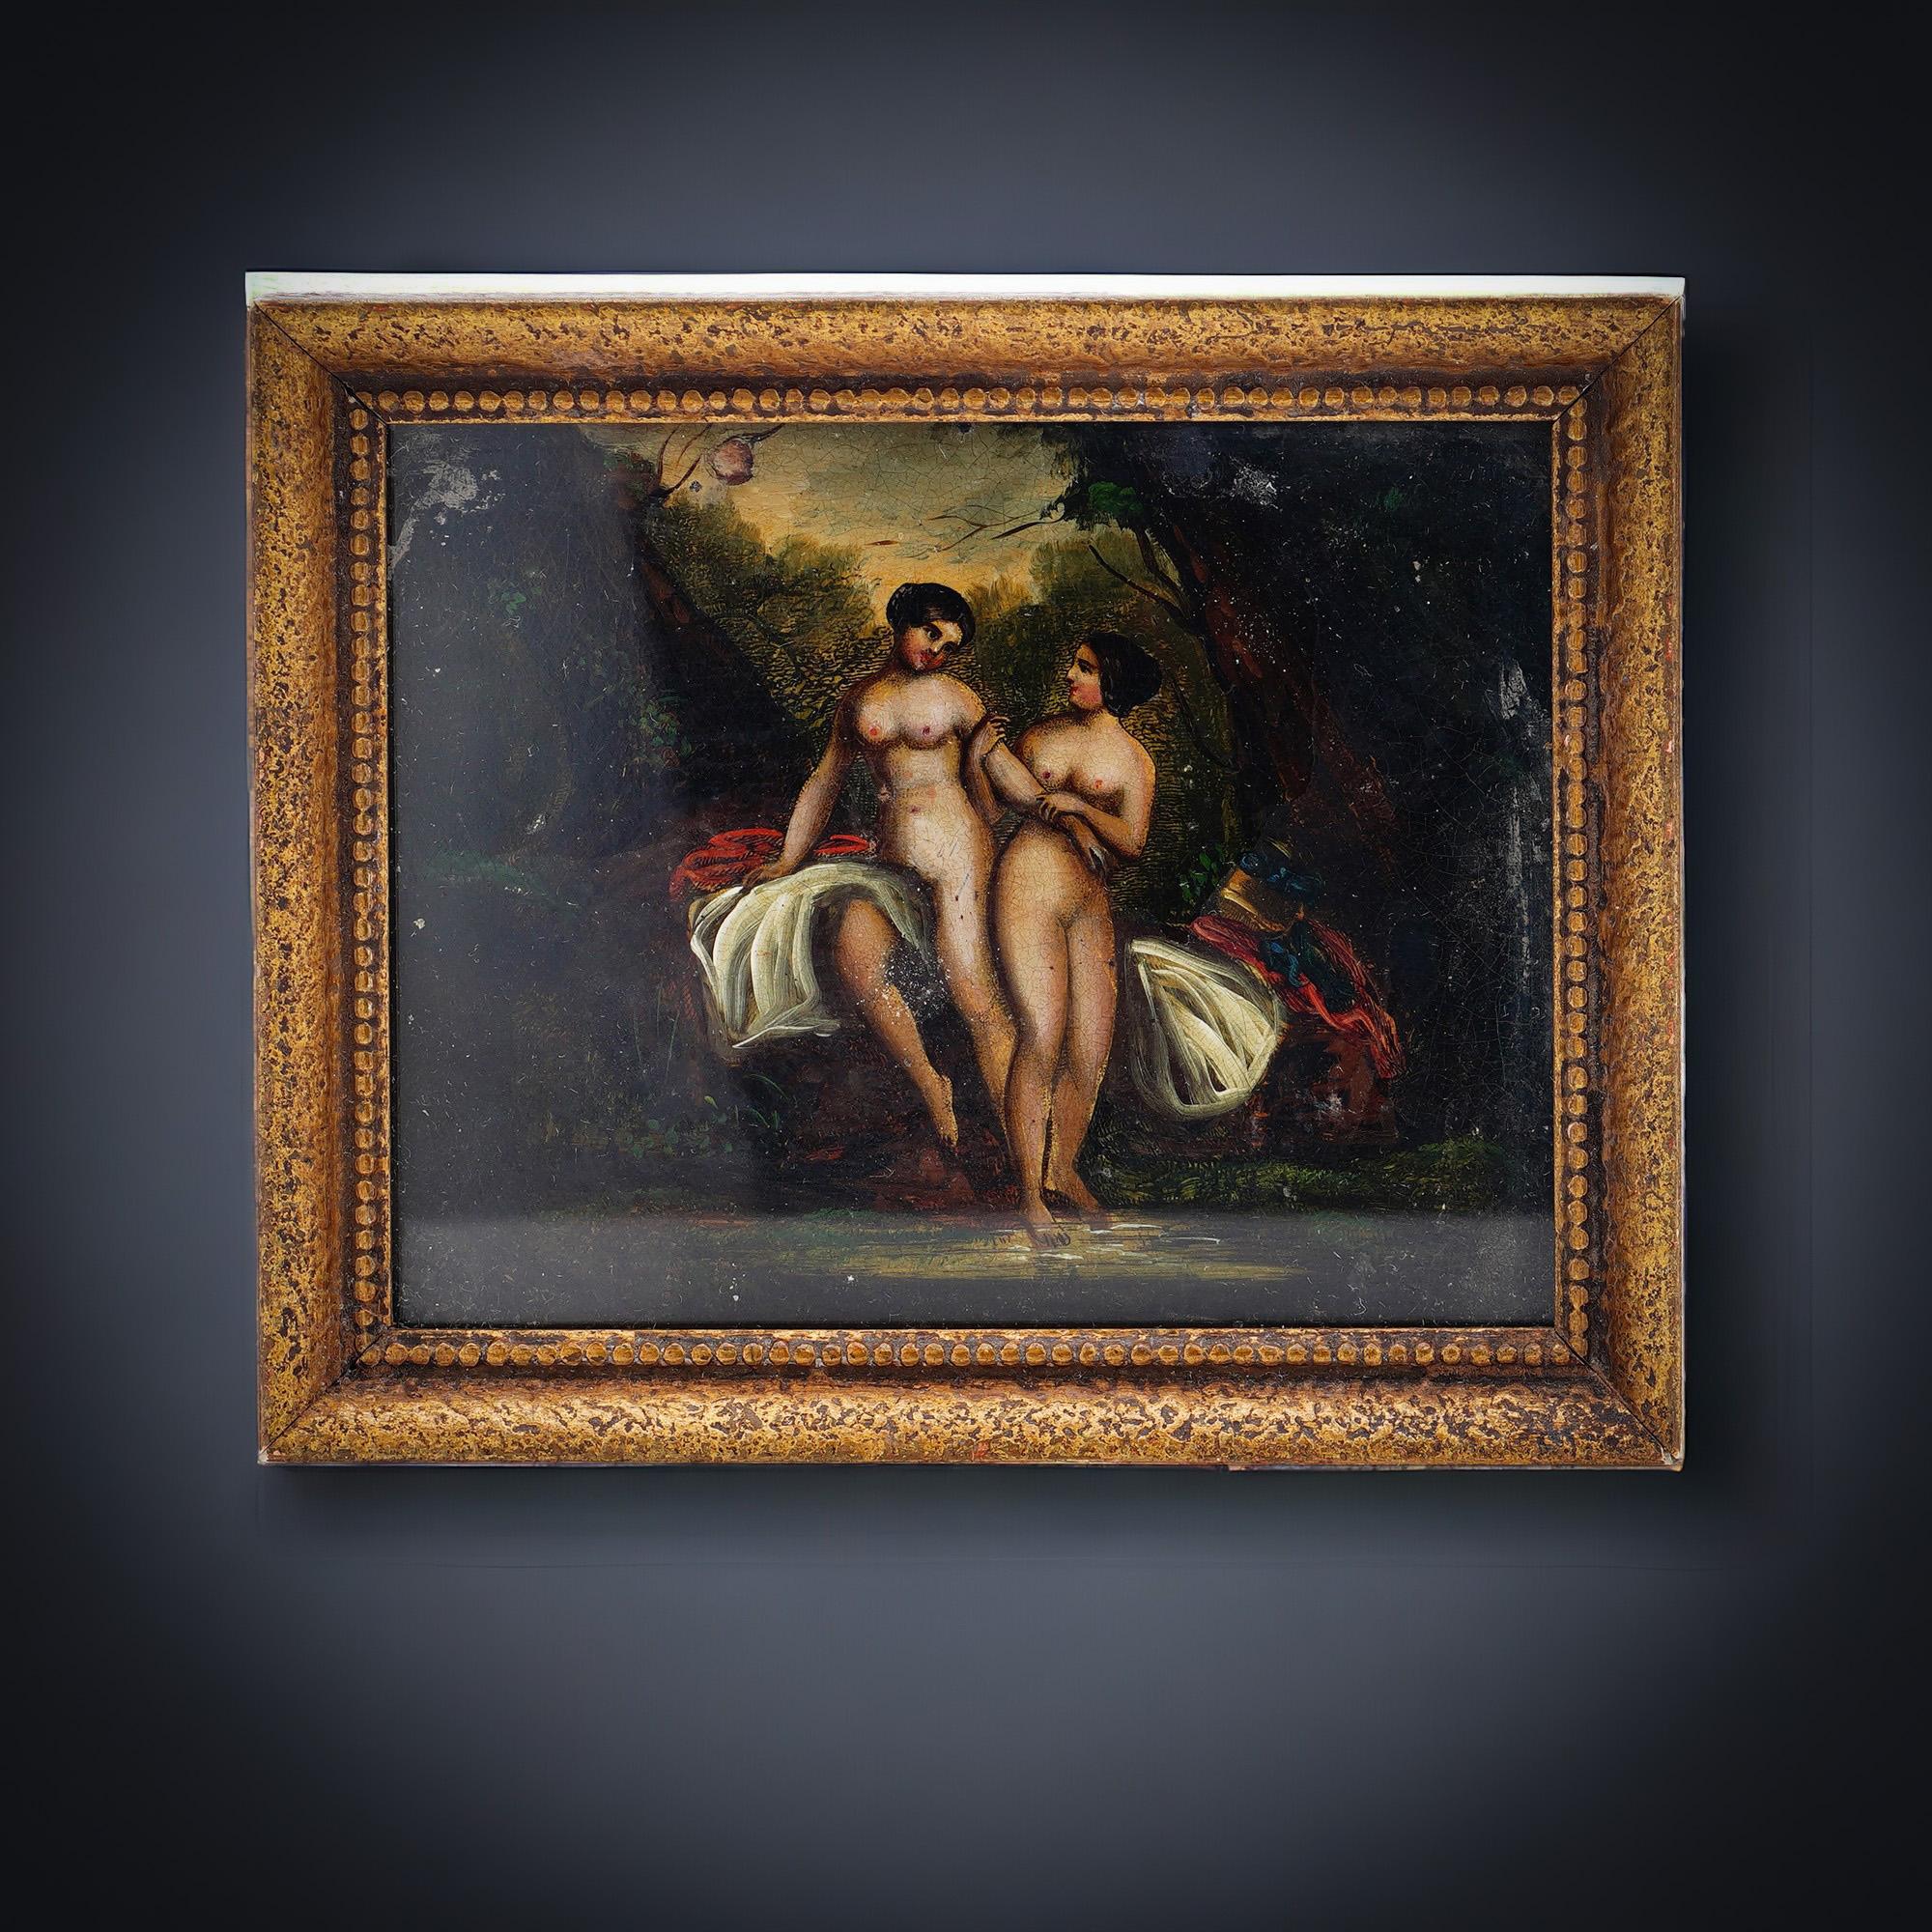 Antique 19th-century oil on tin painting '' Two nudes in nature ''

Dimensions:
Picture size: 11 x 8.5 x 8.5 cm 
Weight: 118 grams

Condition: Painting is pre-owned, has age-related wear and tear, minor parts of paints are missing, please see